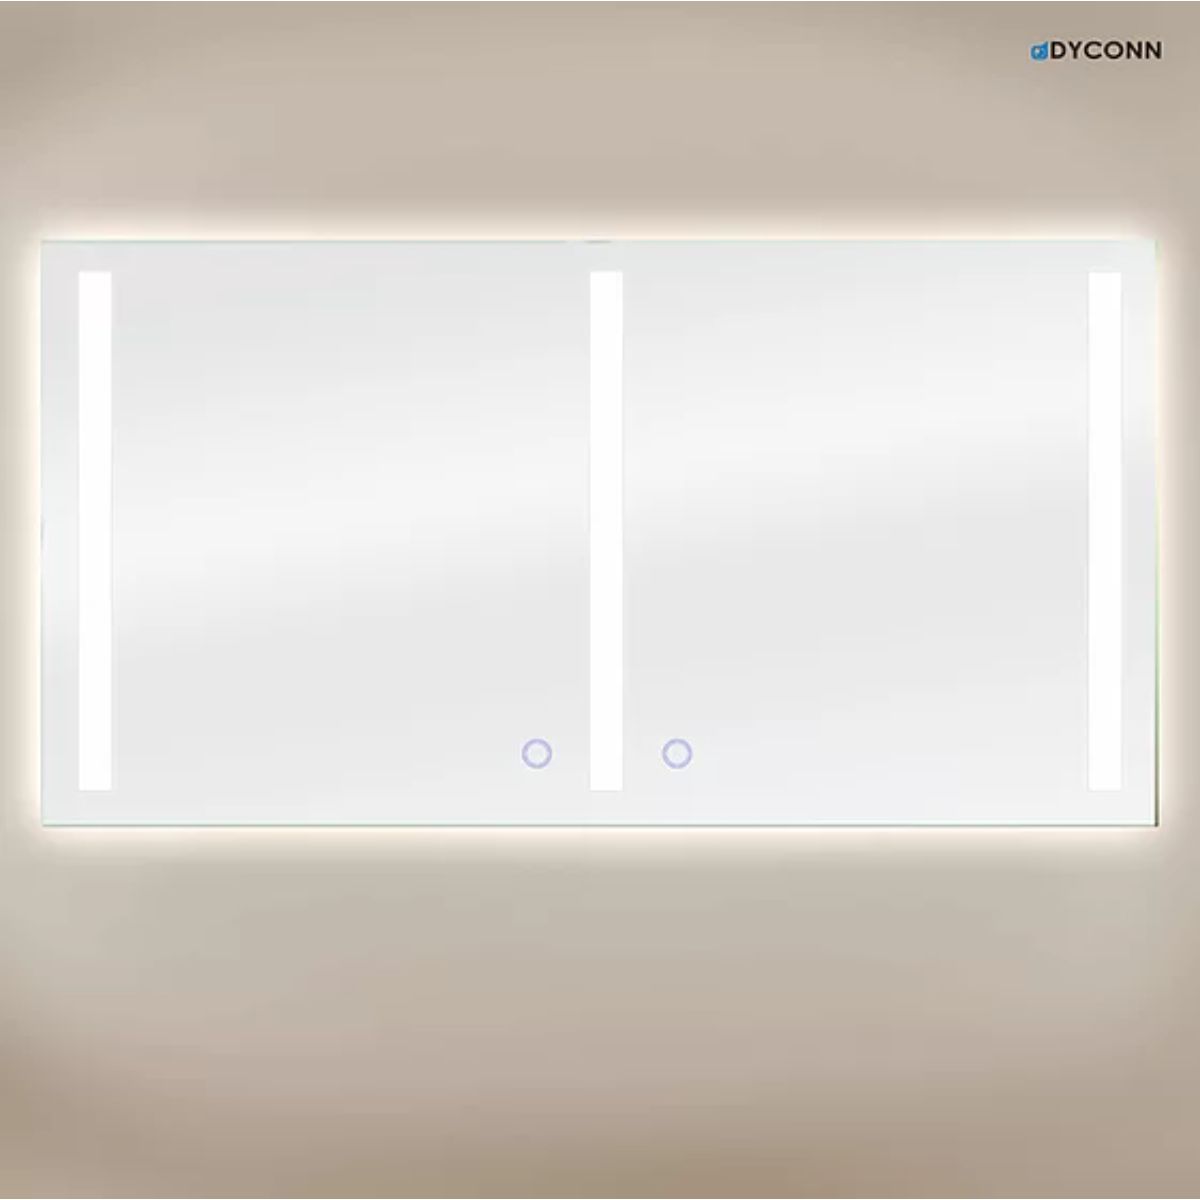 Catella Plus 72 in. x 38 in. LED Wall Mirror with Touch On/Off Dimmer Function